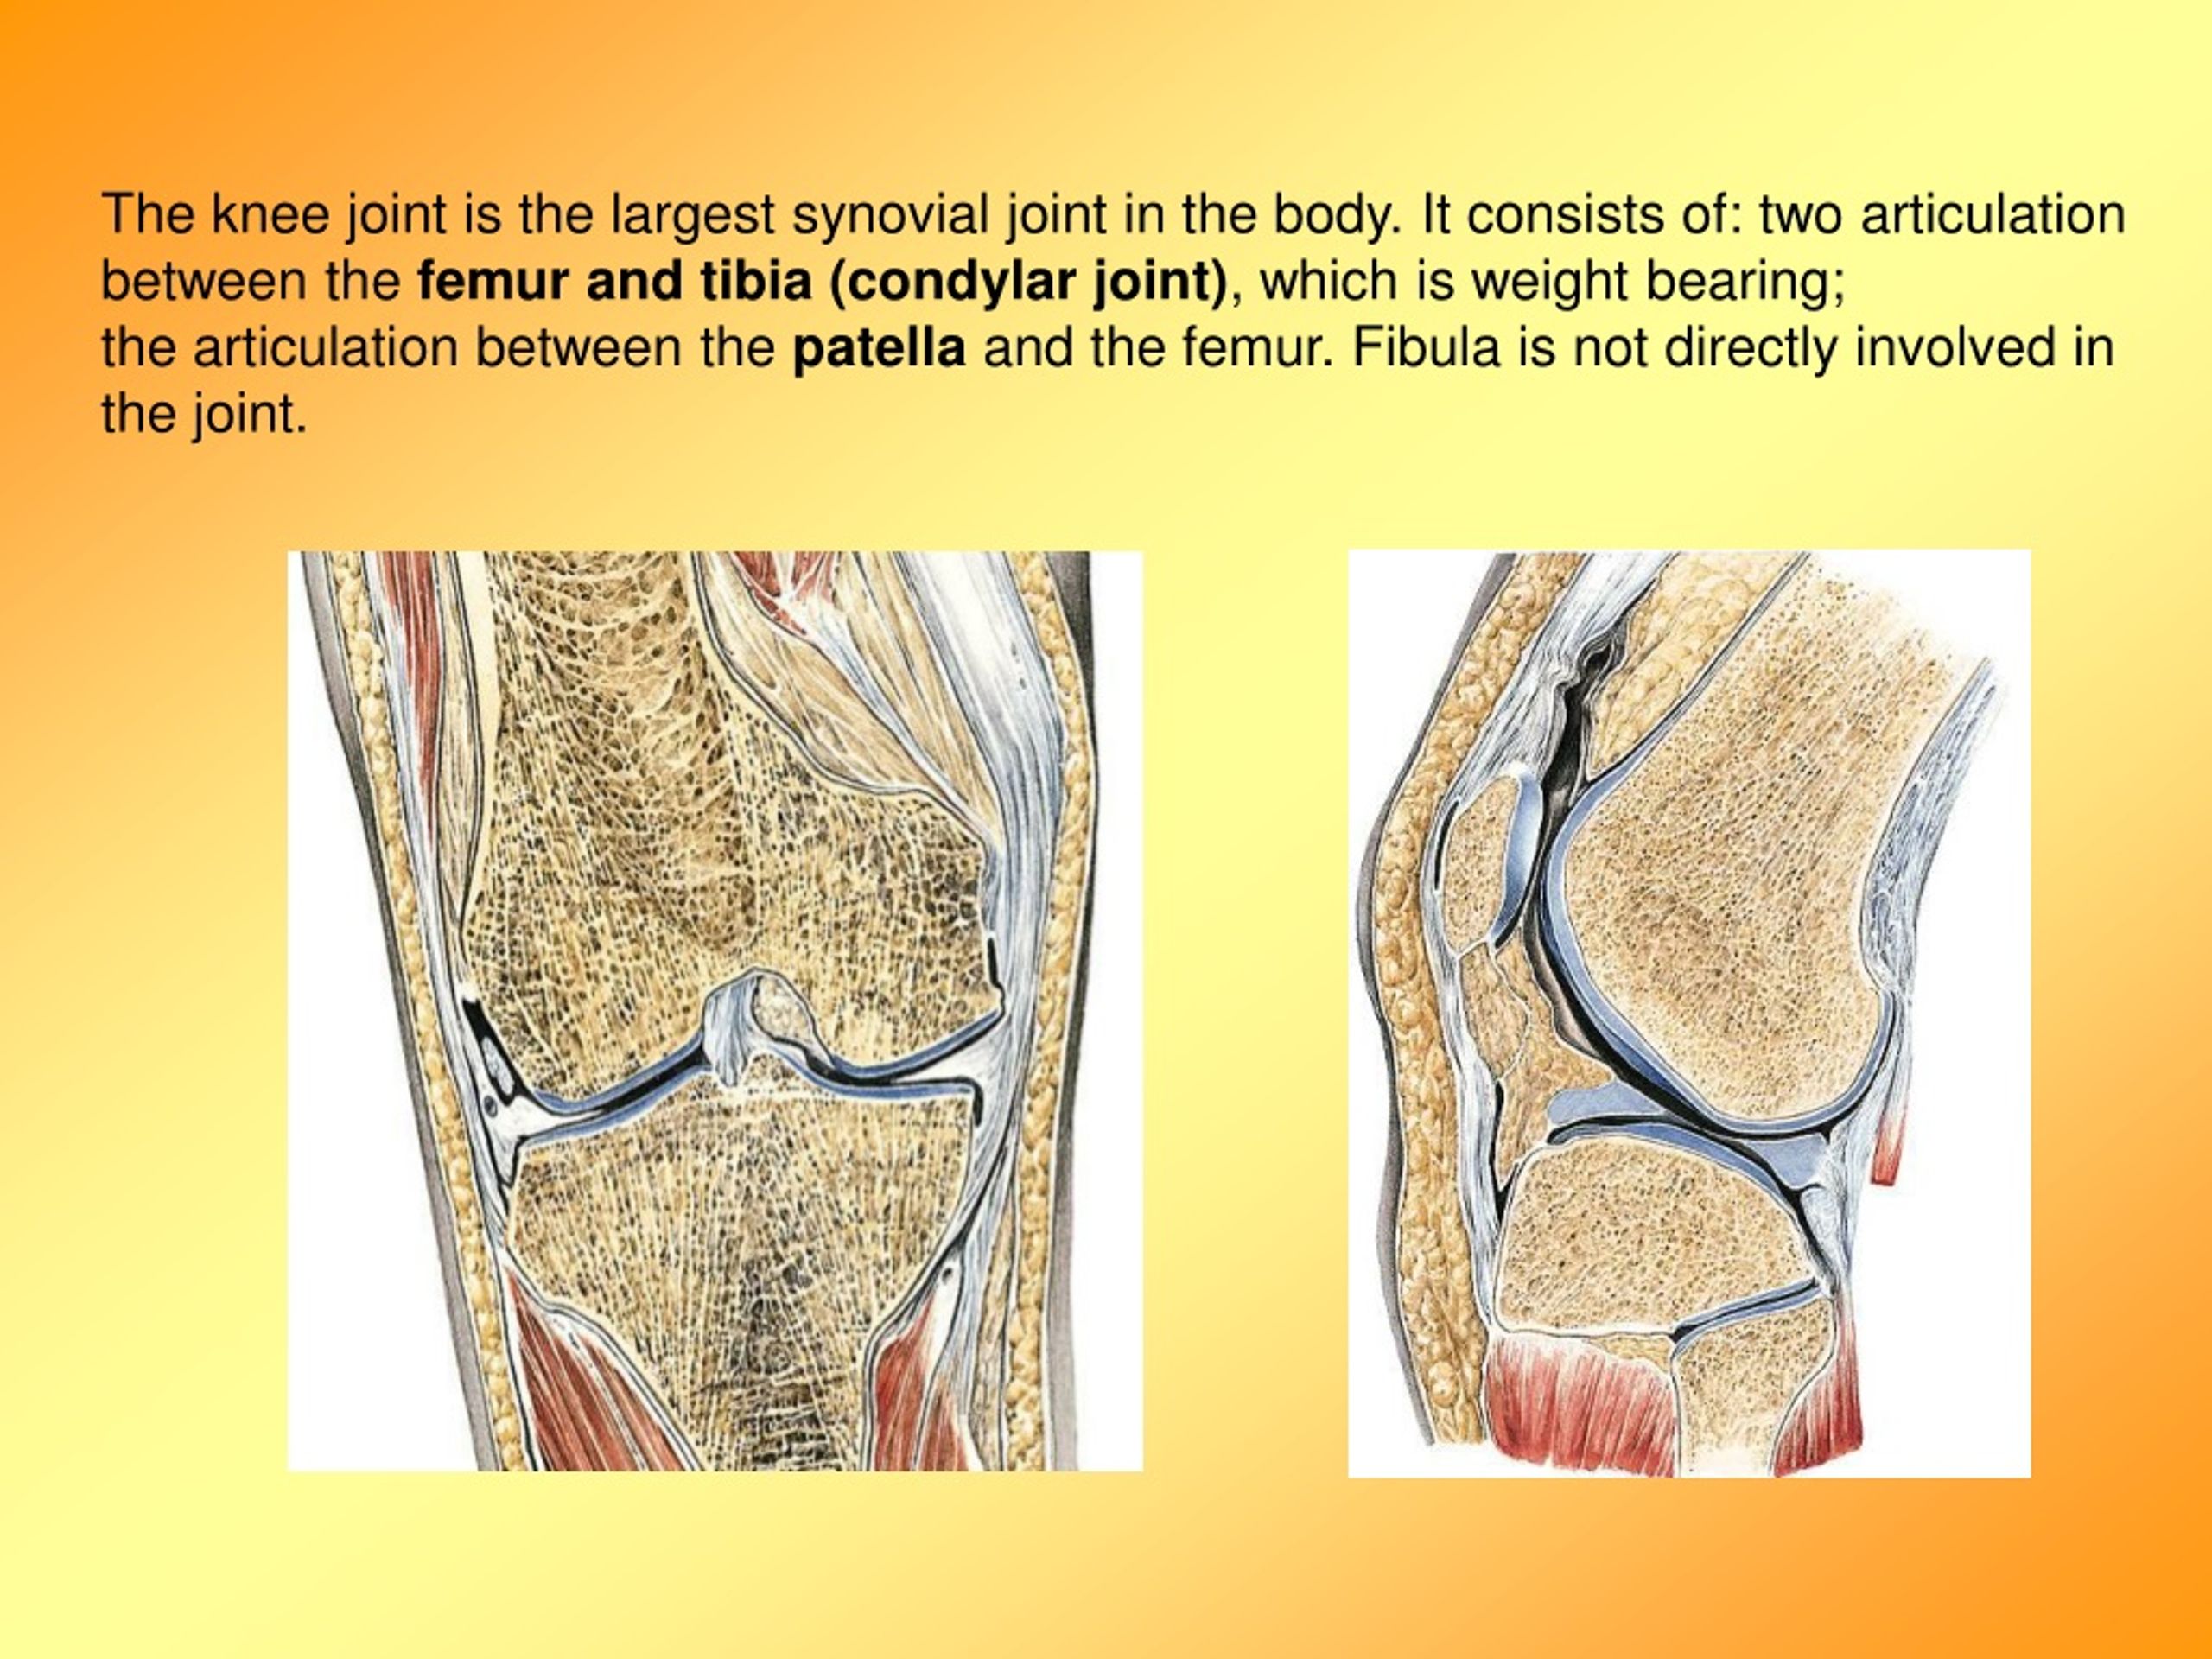 Ppt Knee Joint Muscles And Actions Of The Knee Powerpoint Presentation Id9192502 5167